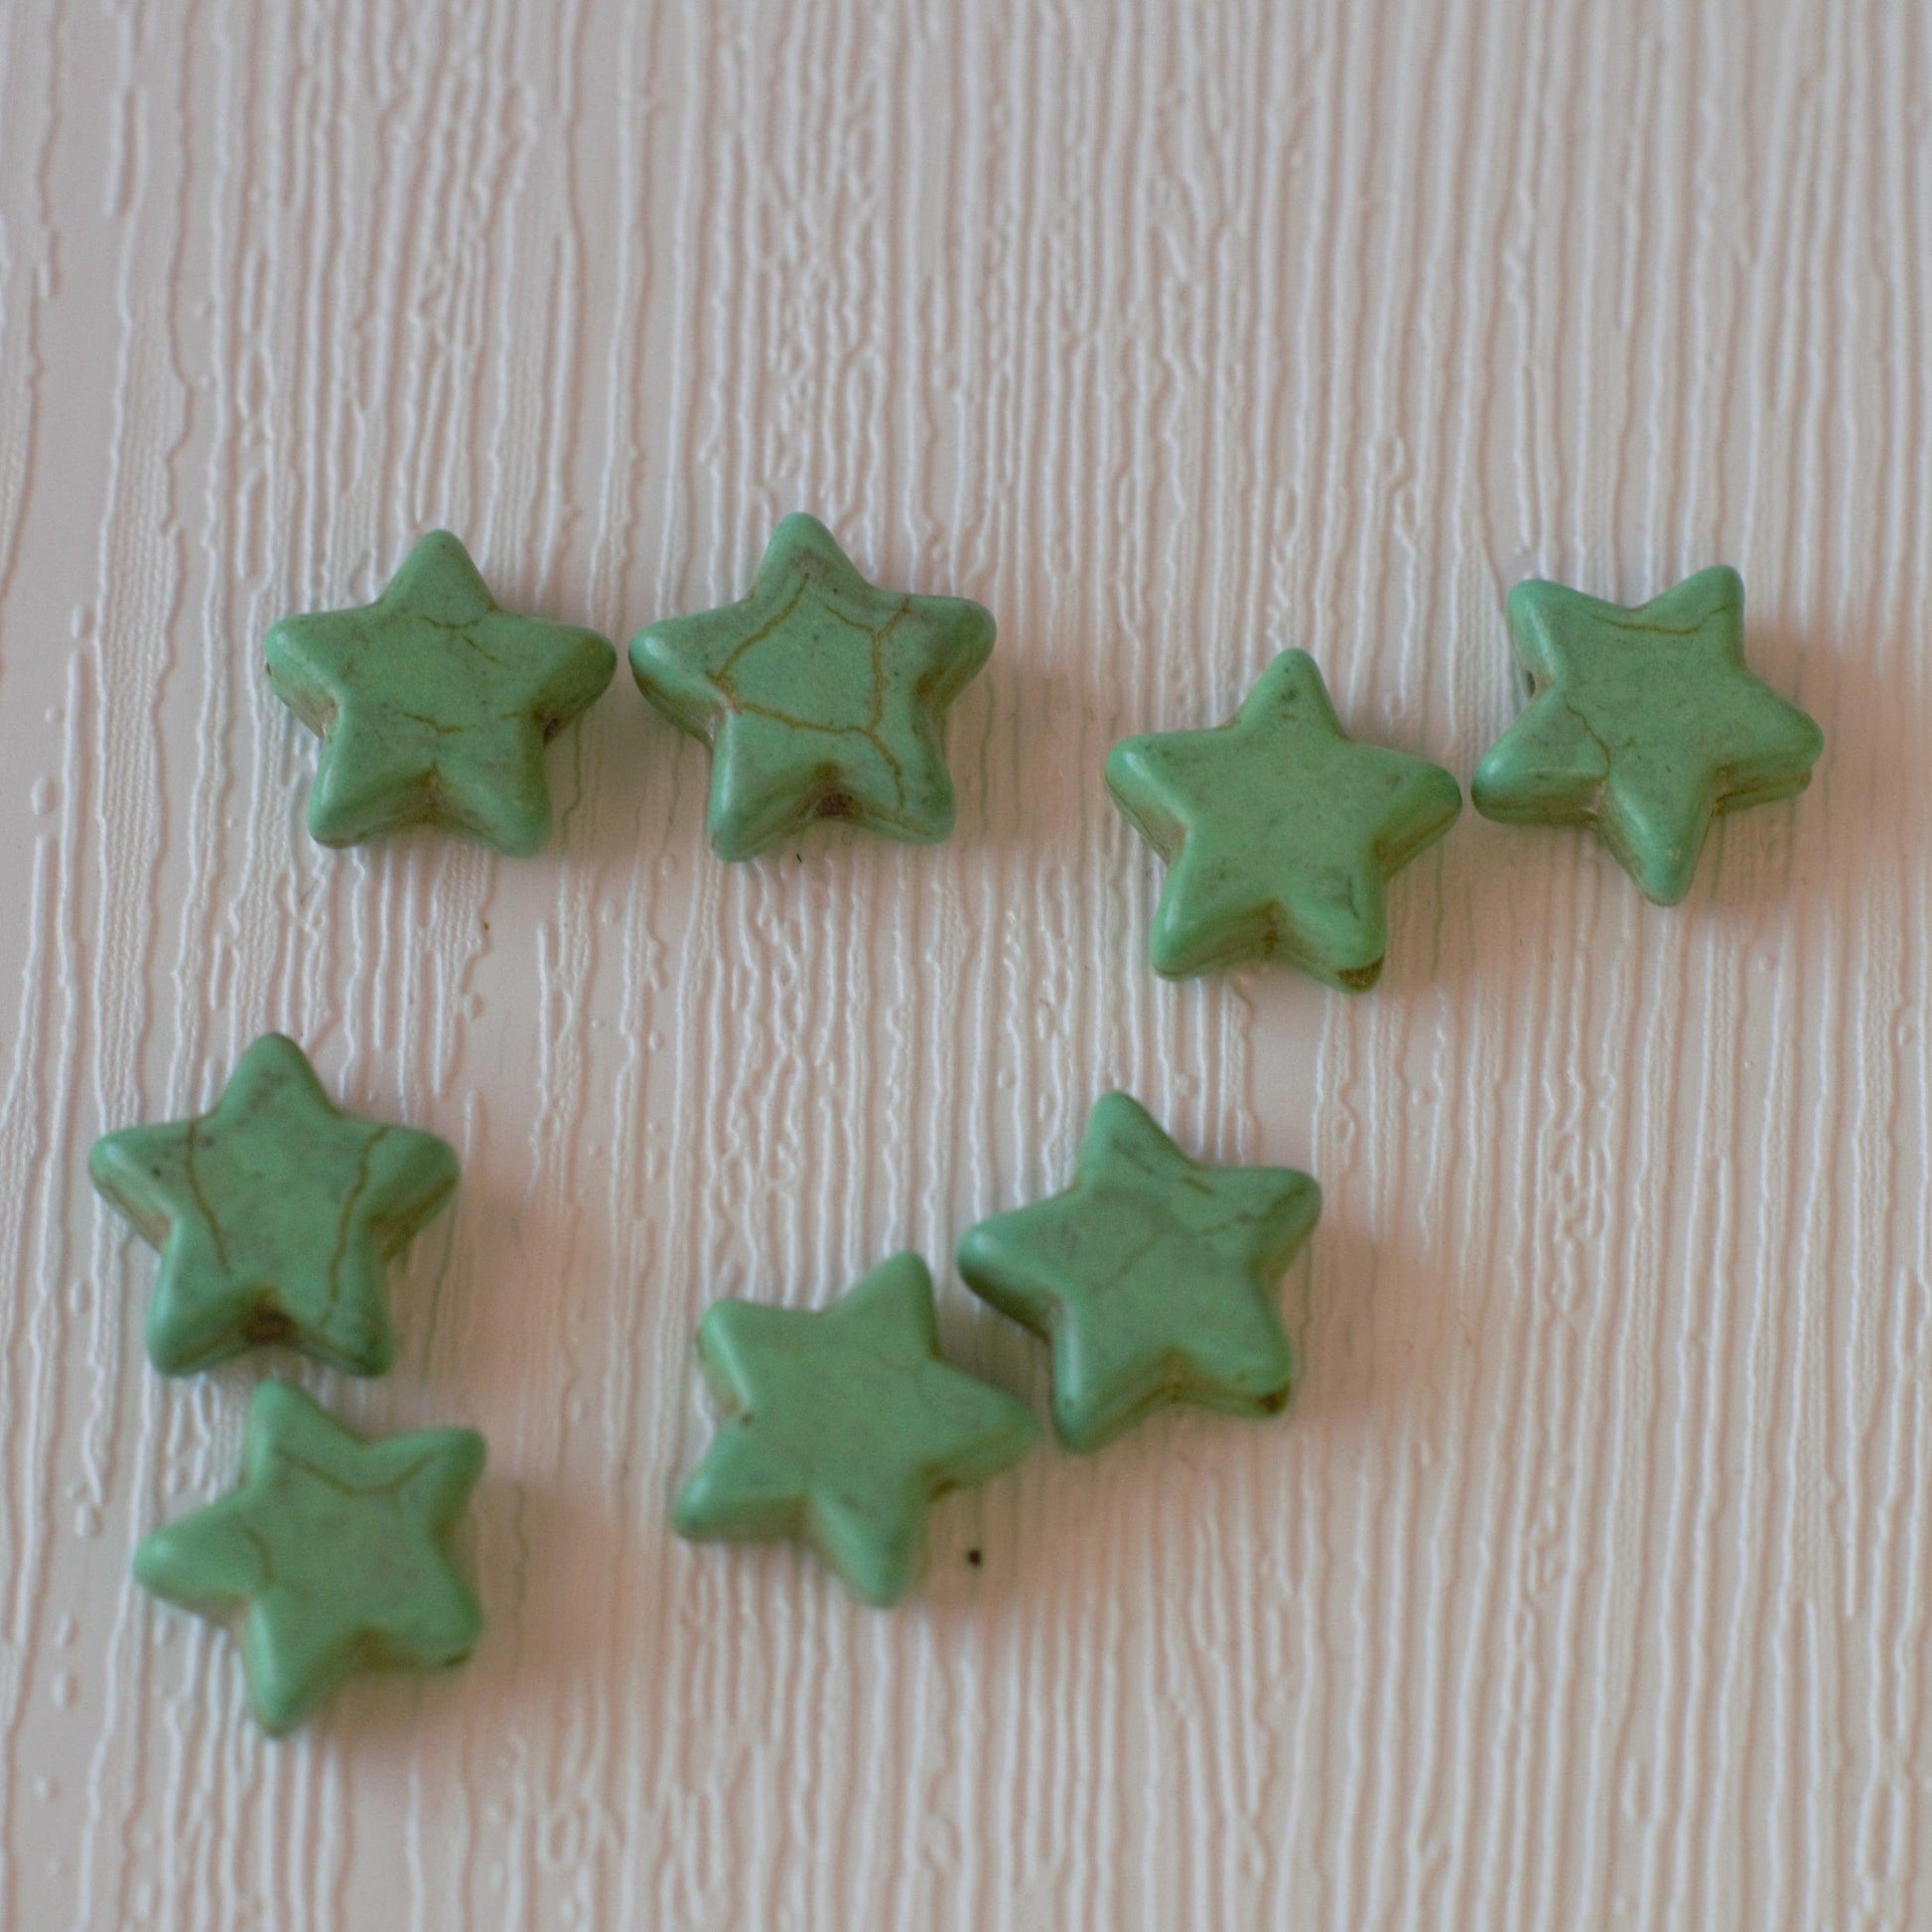 Imitation Turquoise Dyed Howlite Star Beads  - Green Turquoise - Humpday Beads